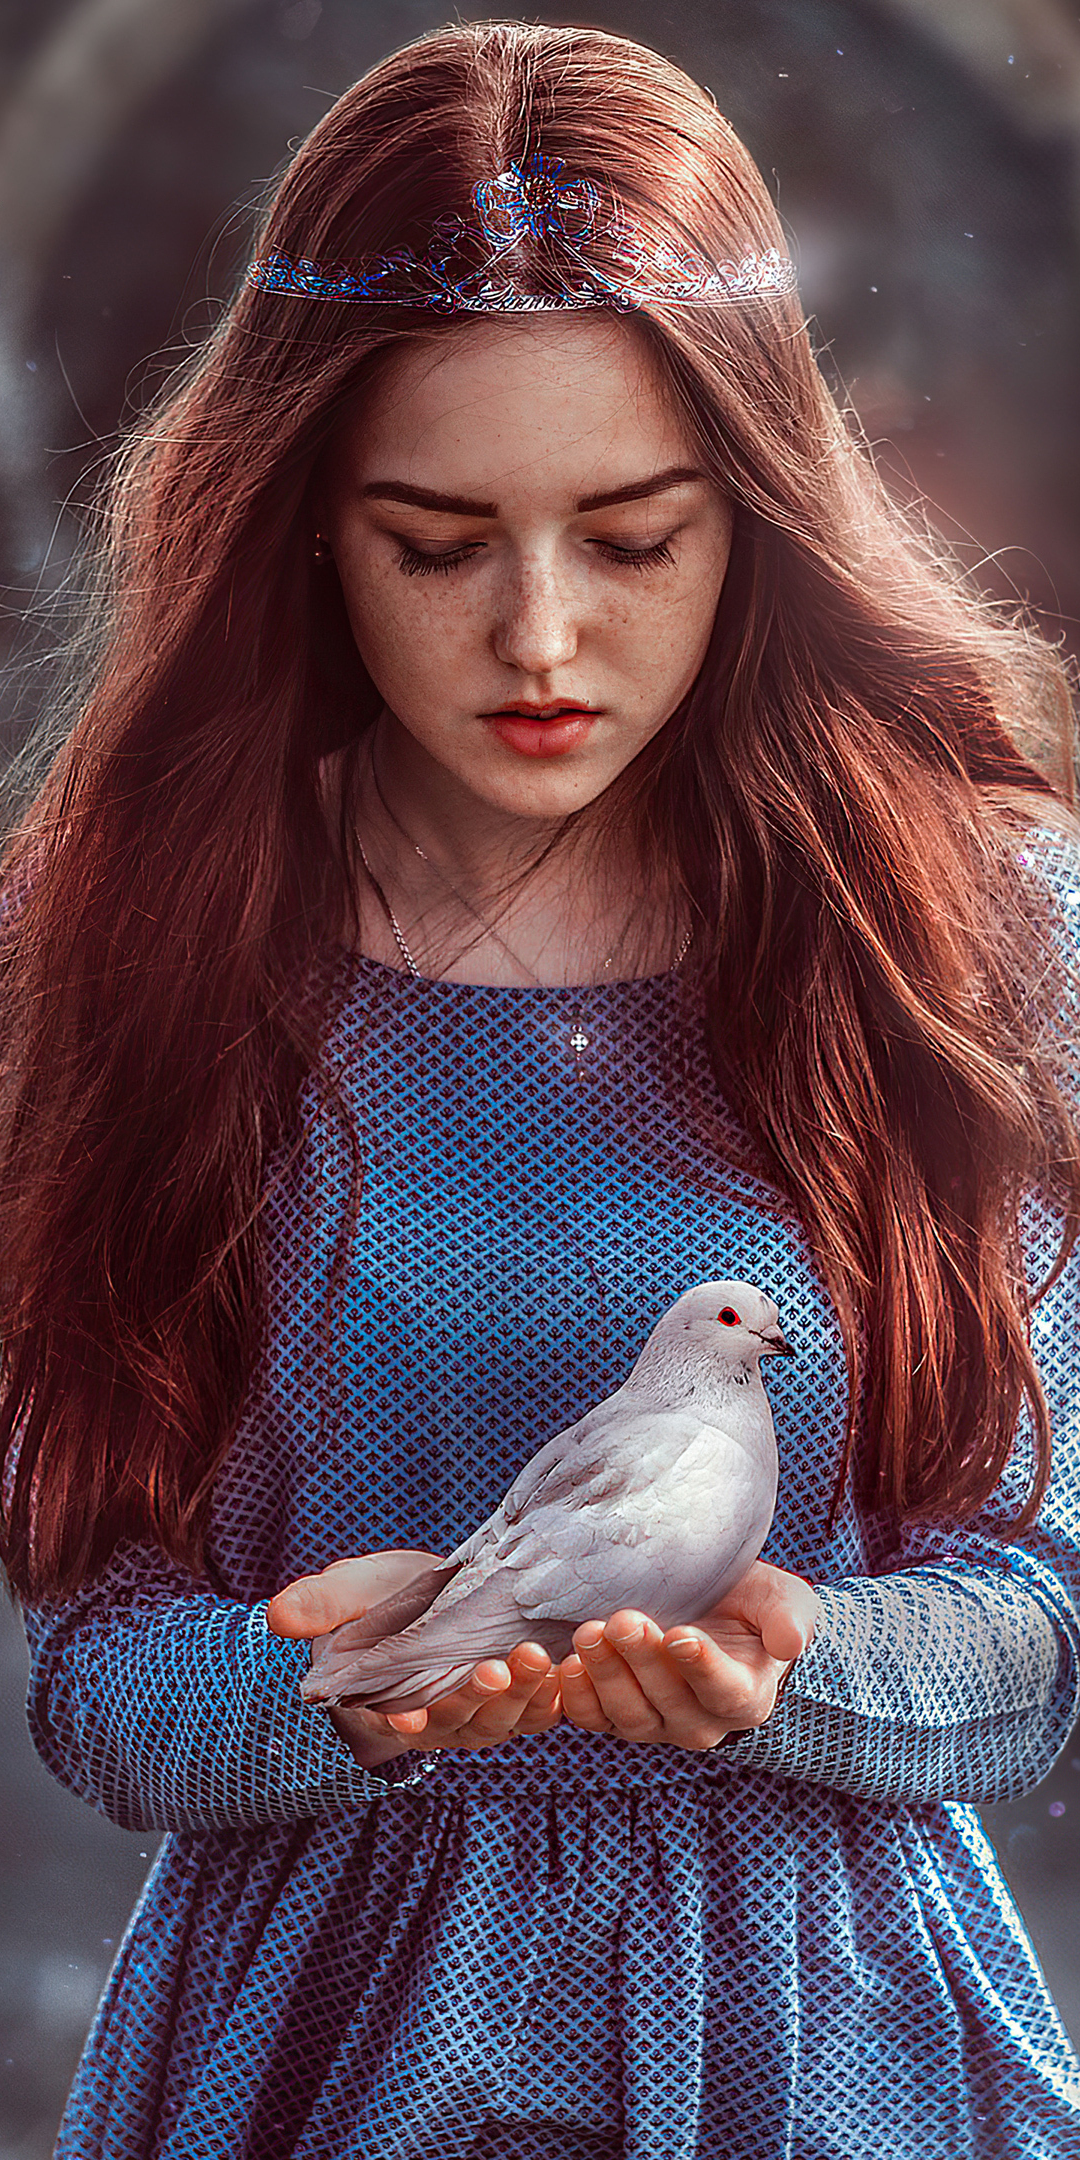 Peace and care, girl model, photoshop, 1080x2160 wallpaper